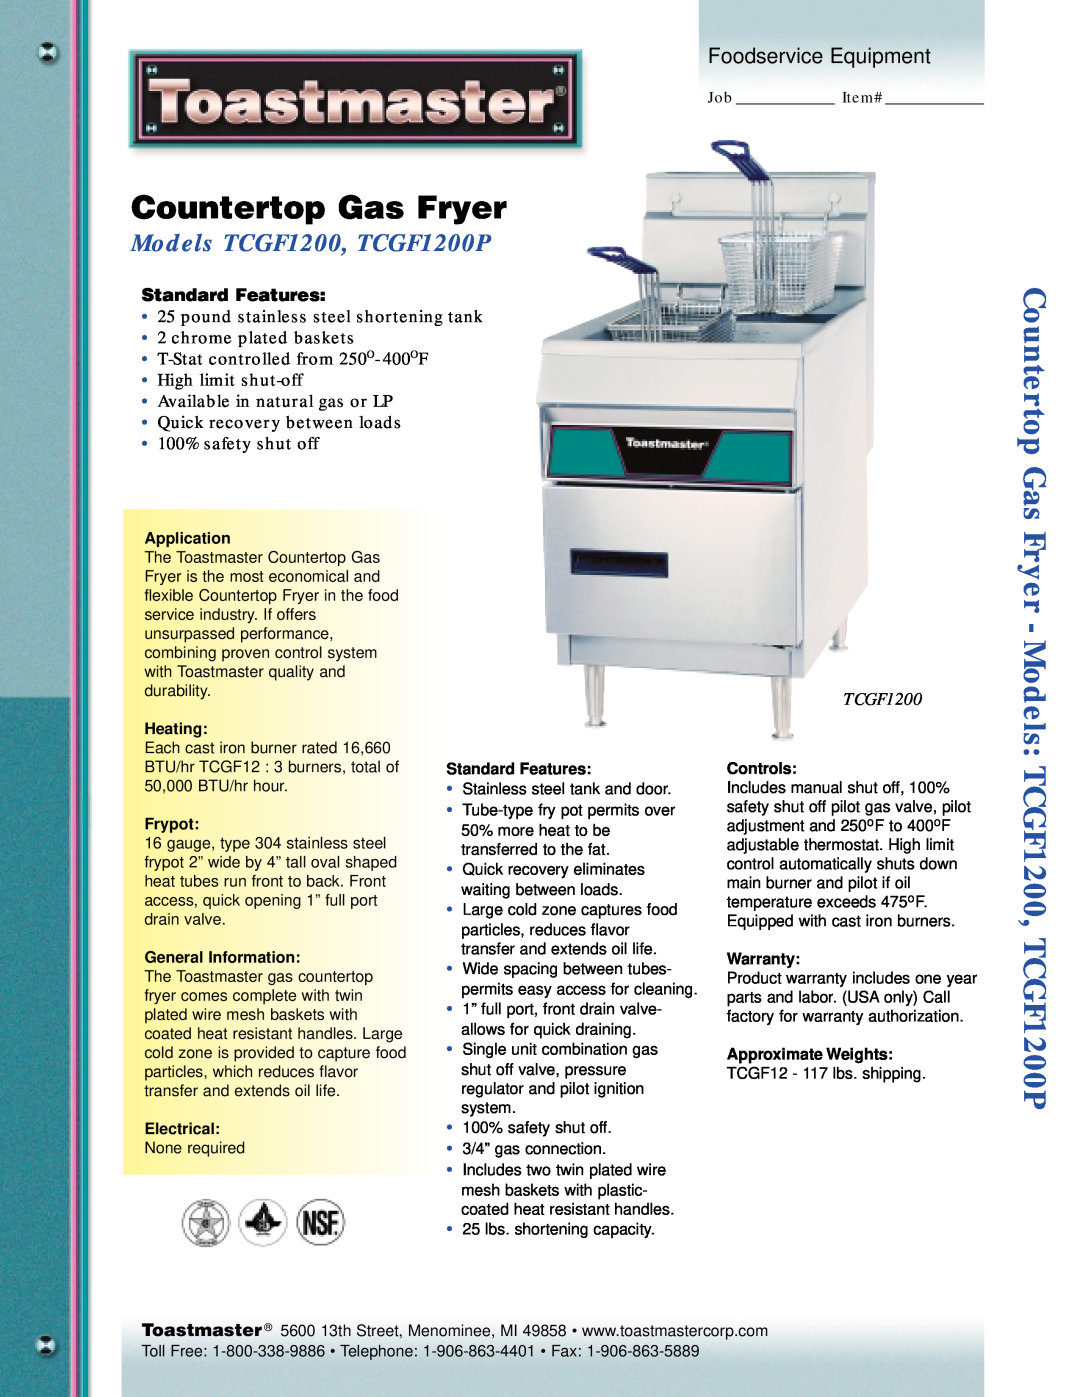 Toastmaster warranty Countertop Gas Fryer, Standard Features, Fryer - Models TCGF1200, TCGF1200P, Foodservice Equipment 